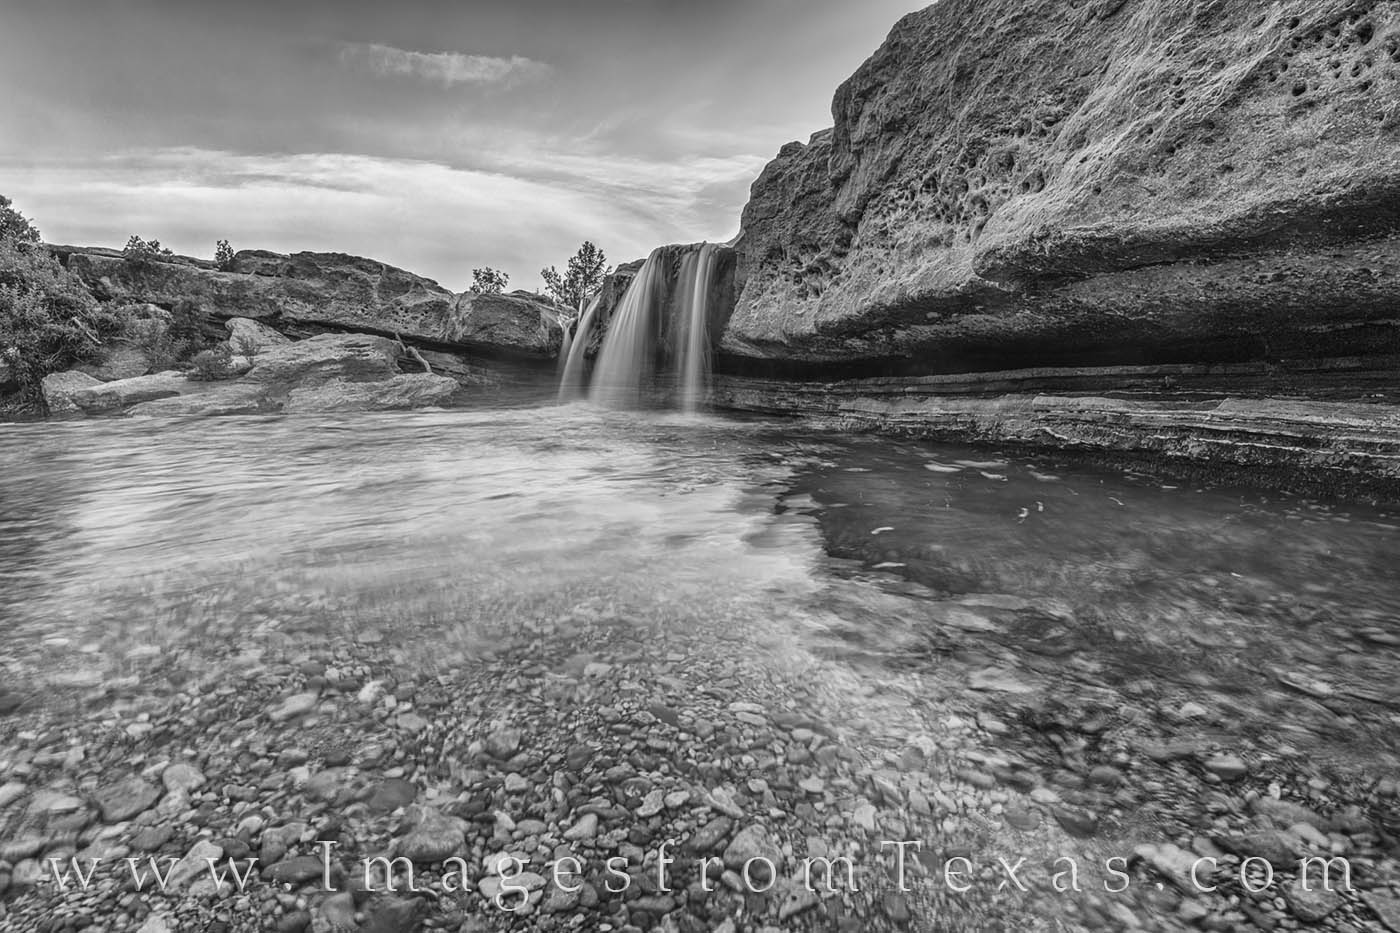 This beautiful waterfall can be found in McKinney Falls State Park. Known as Lower Falls, it provides a nice swimming hole and...